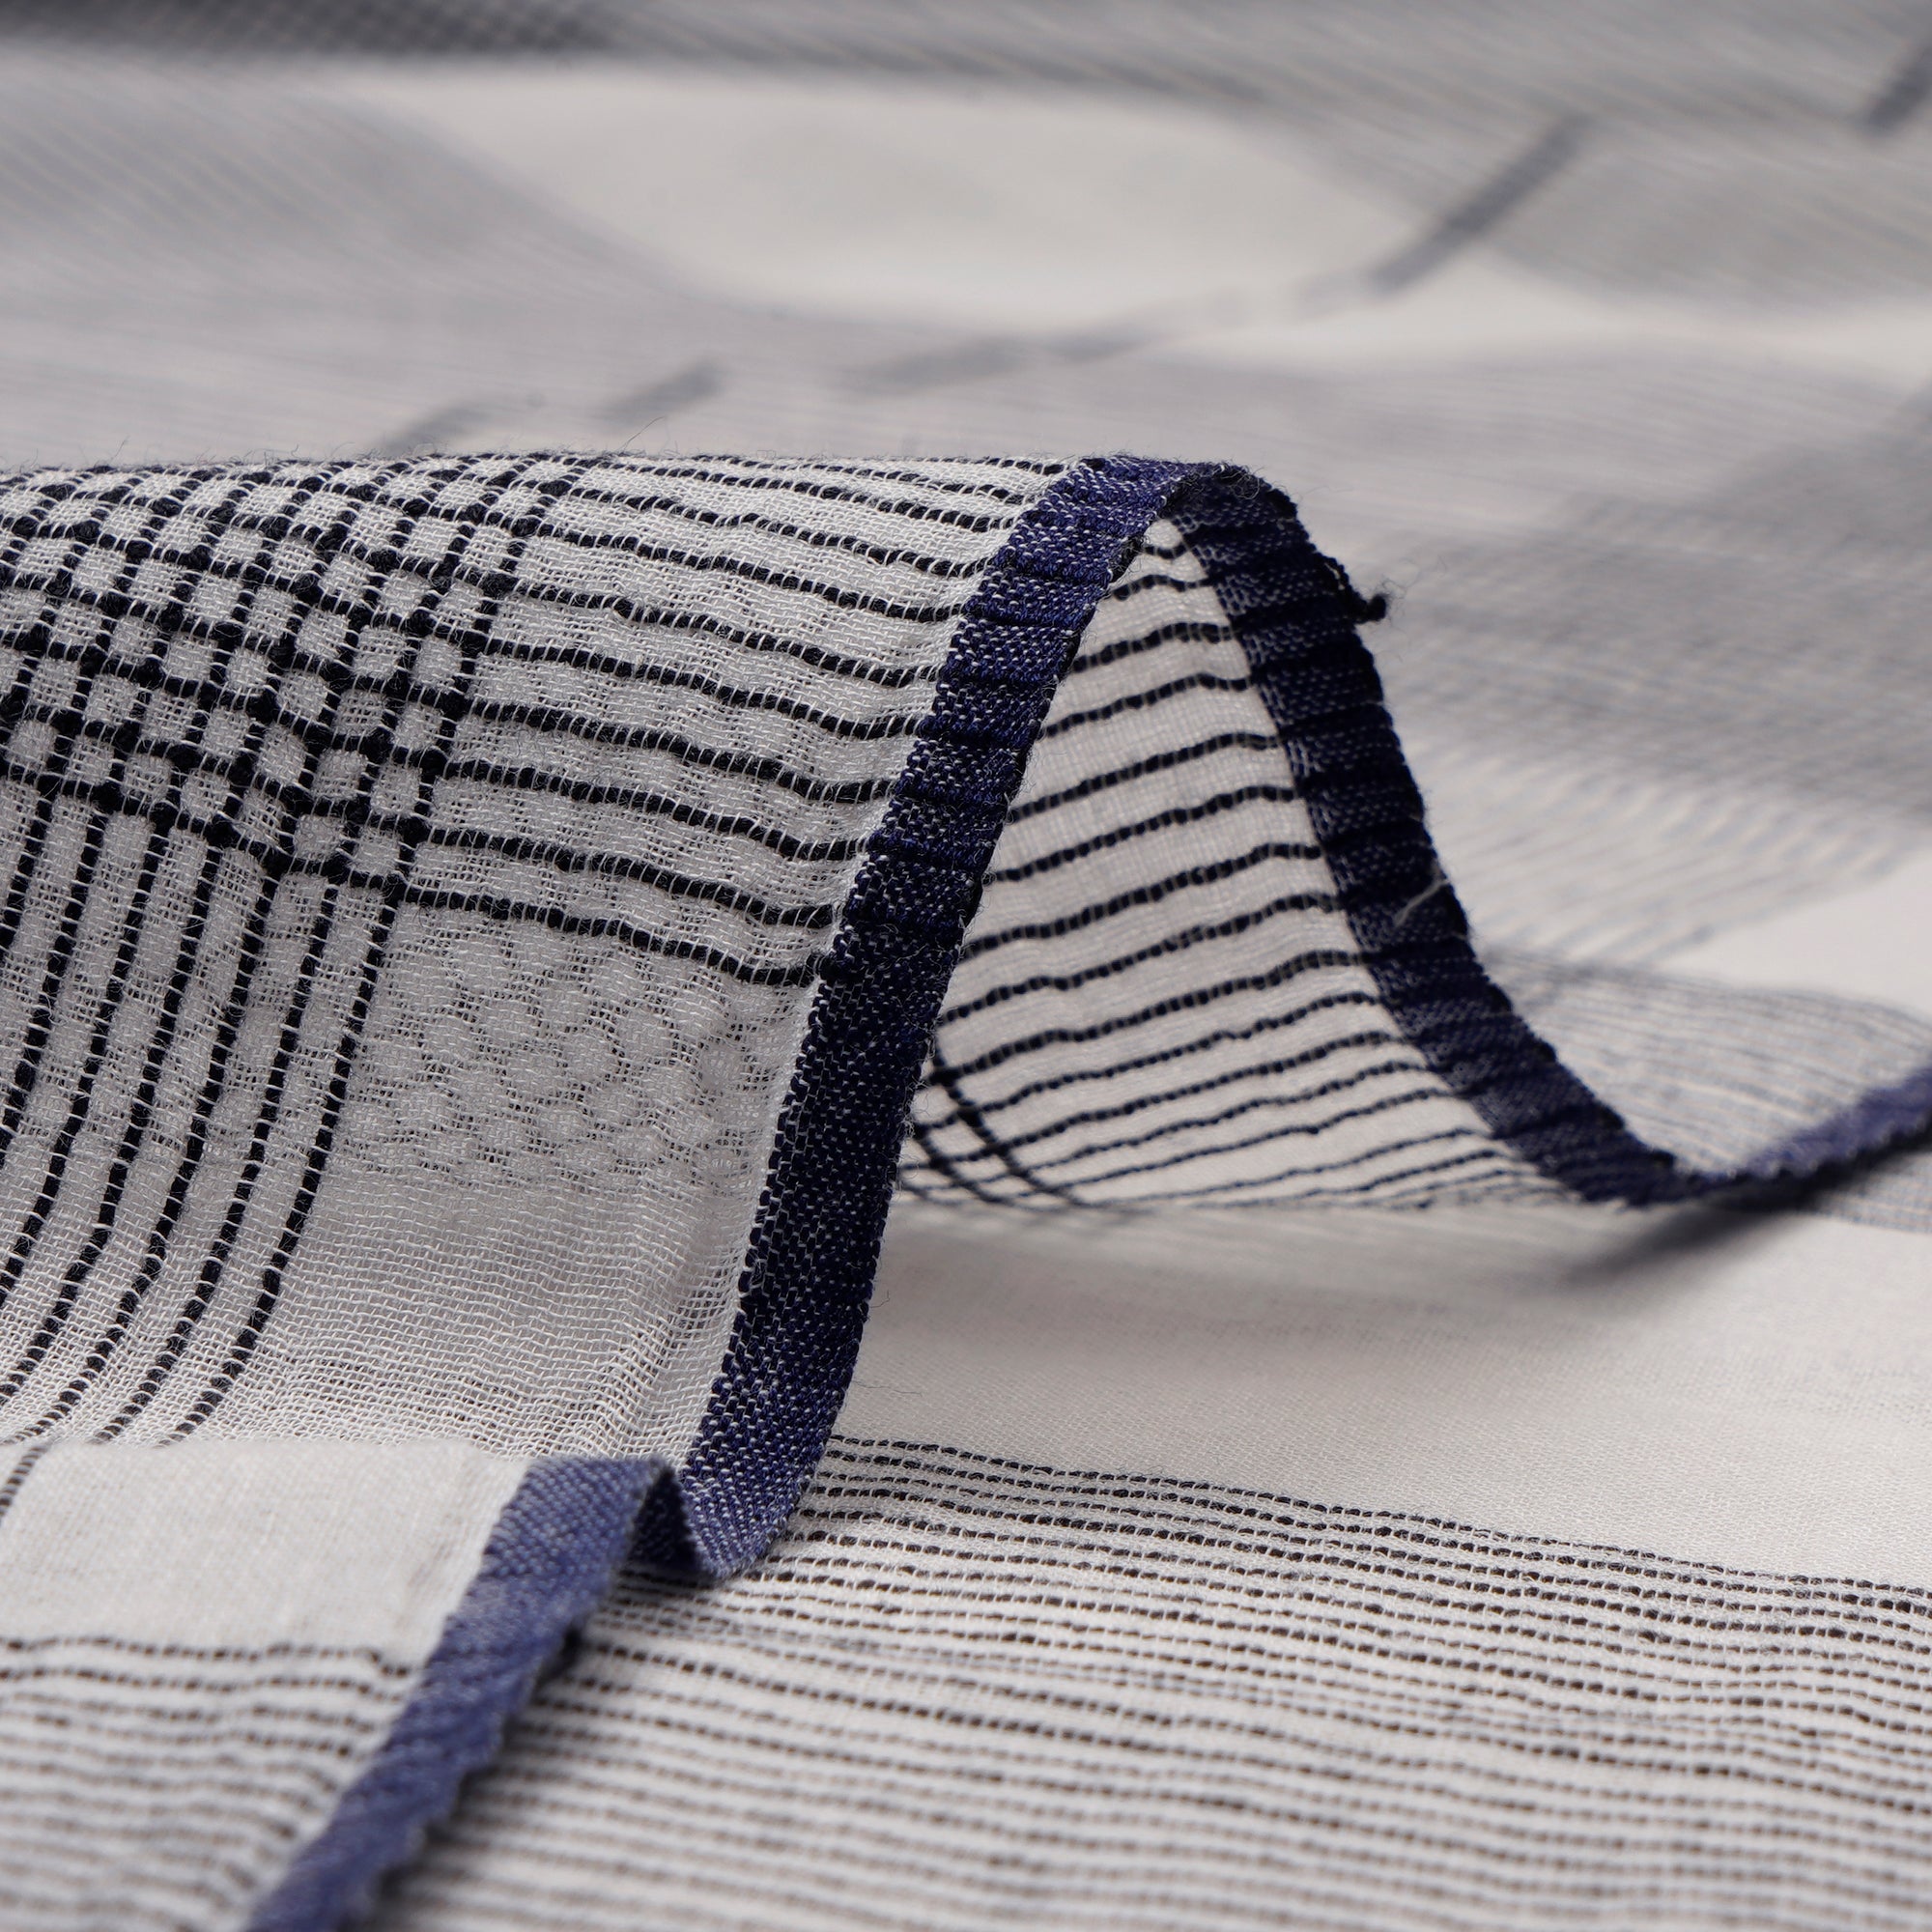 Off-White Striped Check Pattern Handwoven Muslin Cotton Fabric